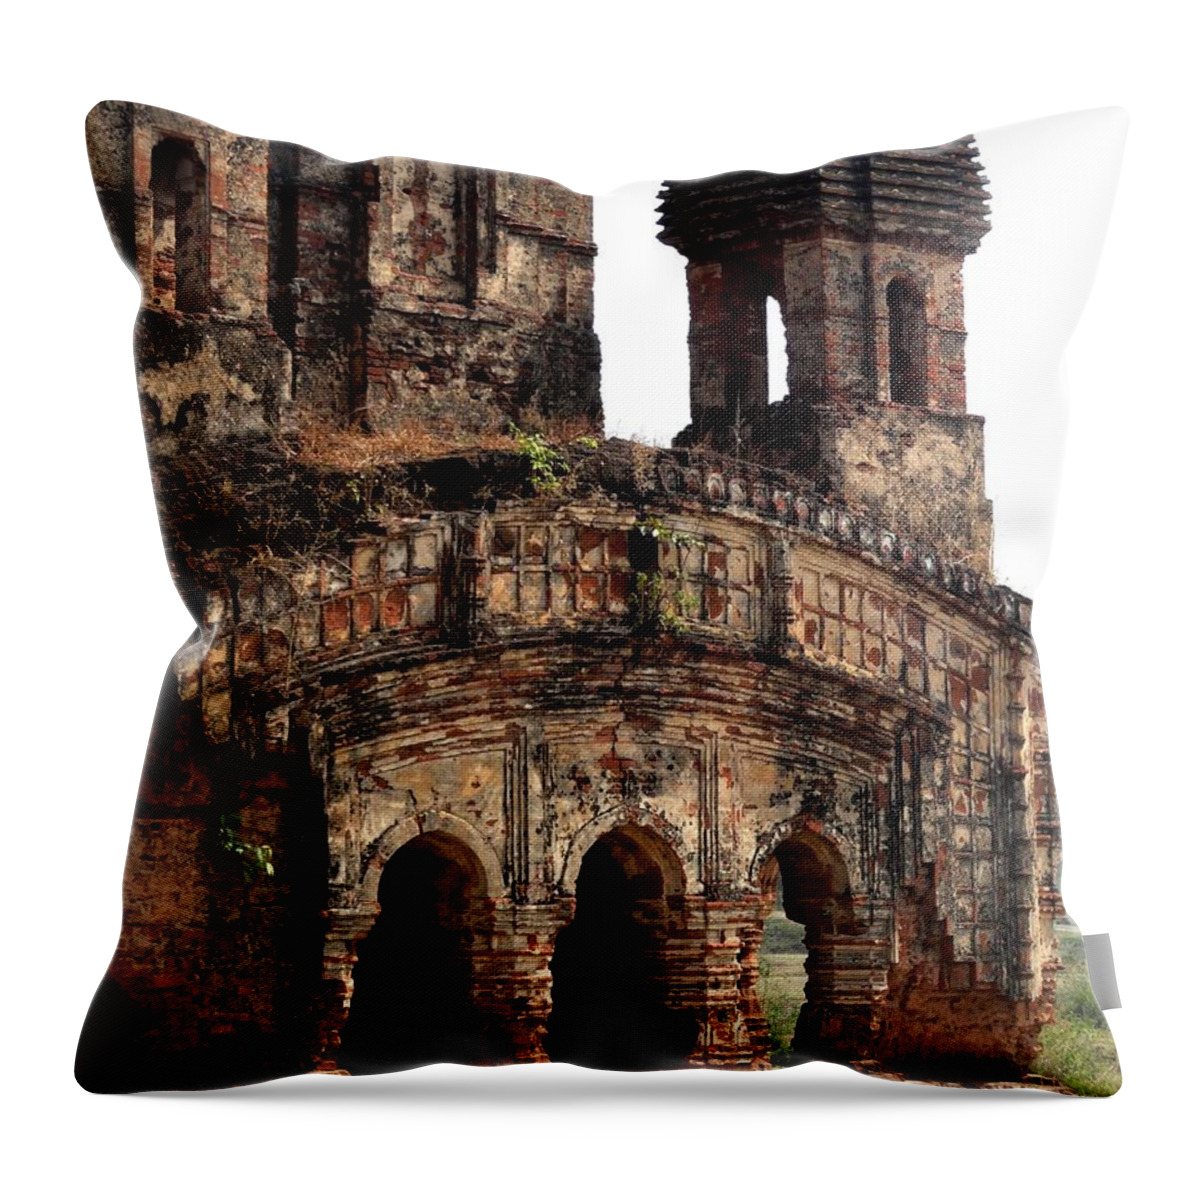 Tranquility Throw Pillow featuring the photograph The Ruins Of The Garh, Terracotta Temple by My Image